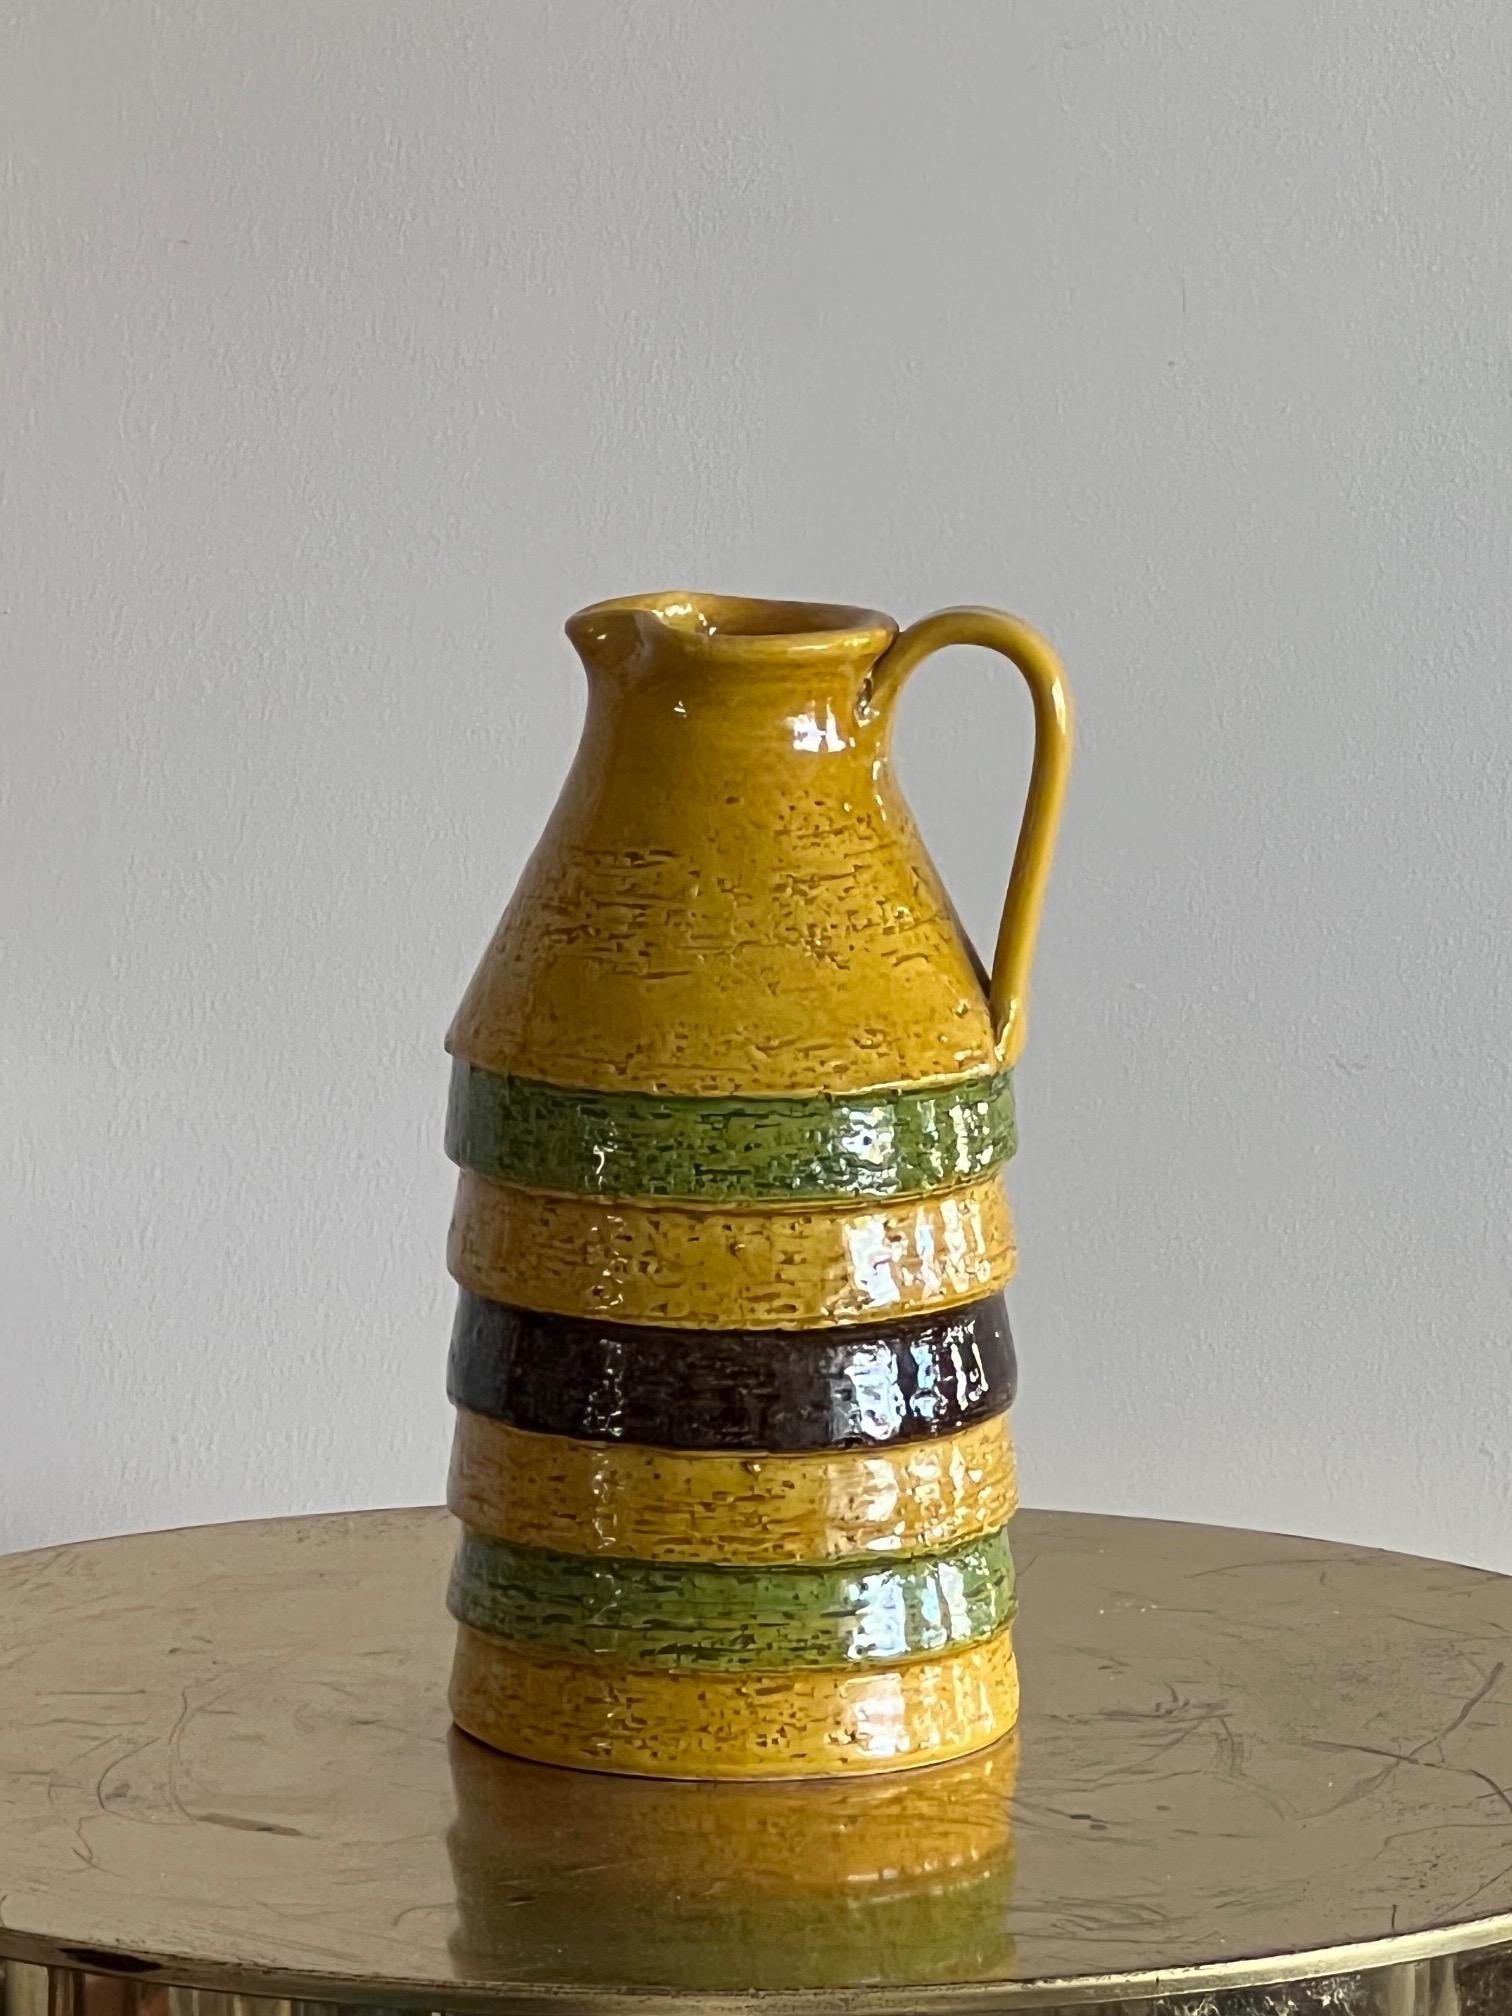 A fun 1960's ceramic pitcher by Bitossi, Italy. Yellow/orange, green and brown glaze with louvered edges add to the design character.